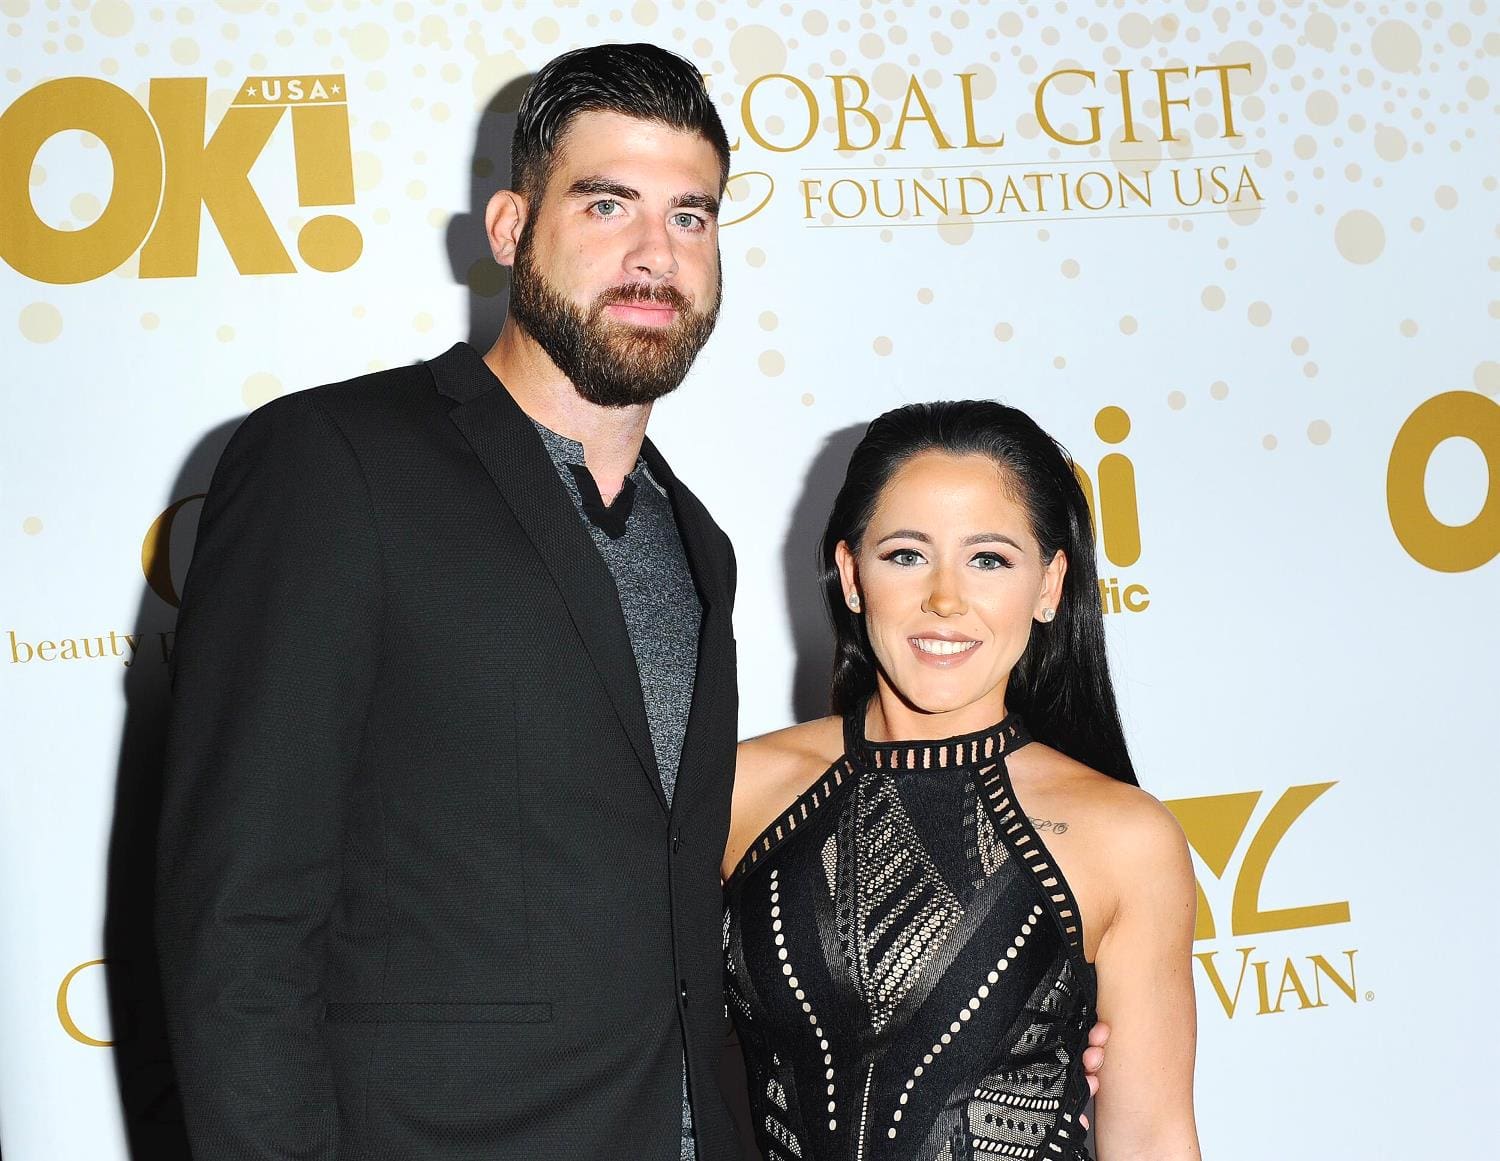 jenelle-evans-claims-she-husband-david-eason-and-their-young-ones-are-great-a-month-after-regaining-custody-of-the-kids